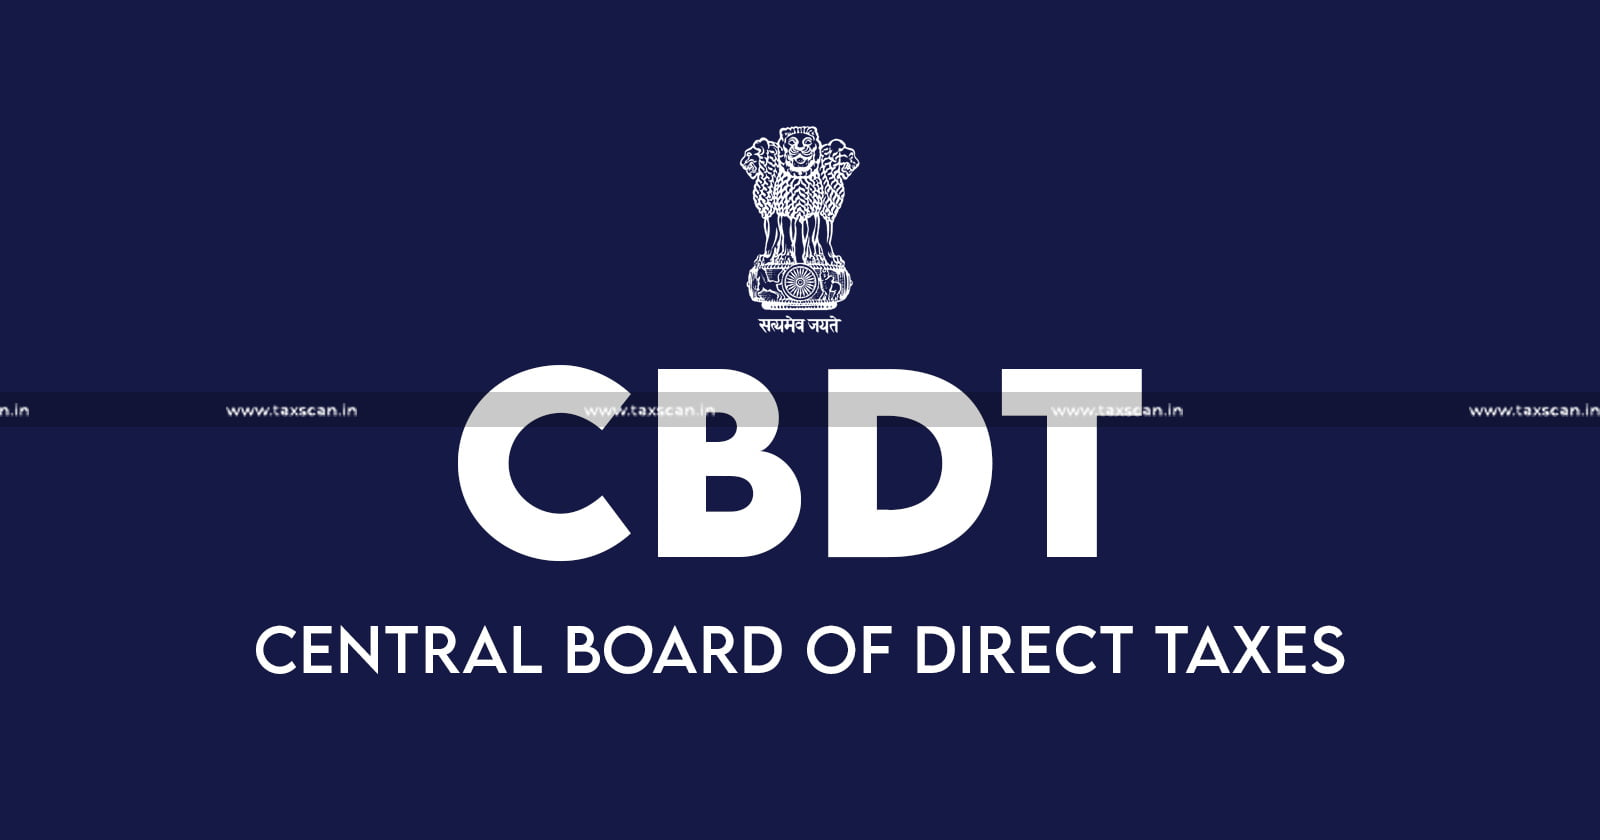 Calling Retirees - Retirees - CBDT - CBDT Welcomes Applications for Contract Consultants - Contract Consultants - Legal & Research - taxscan